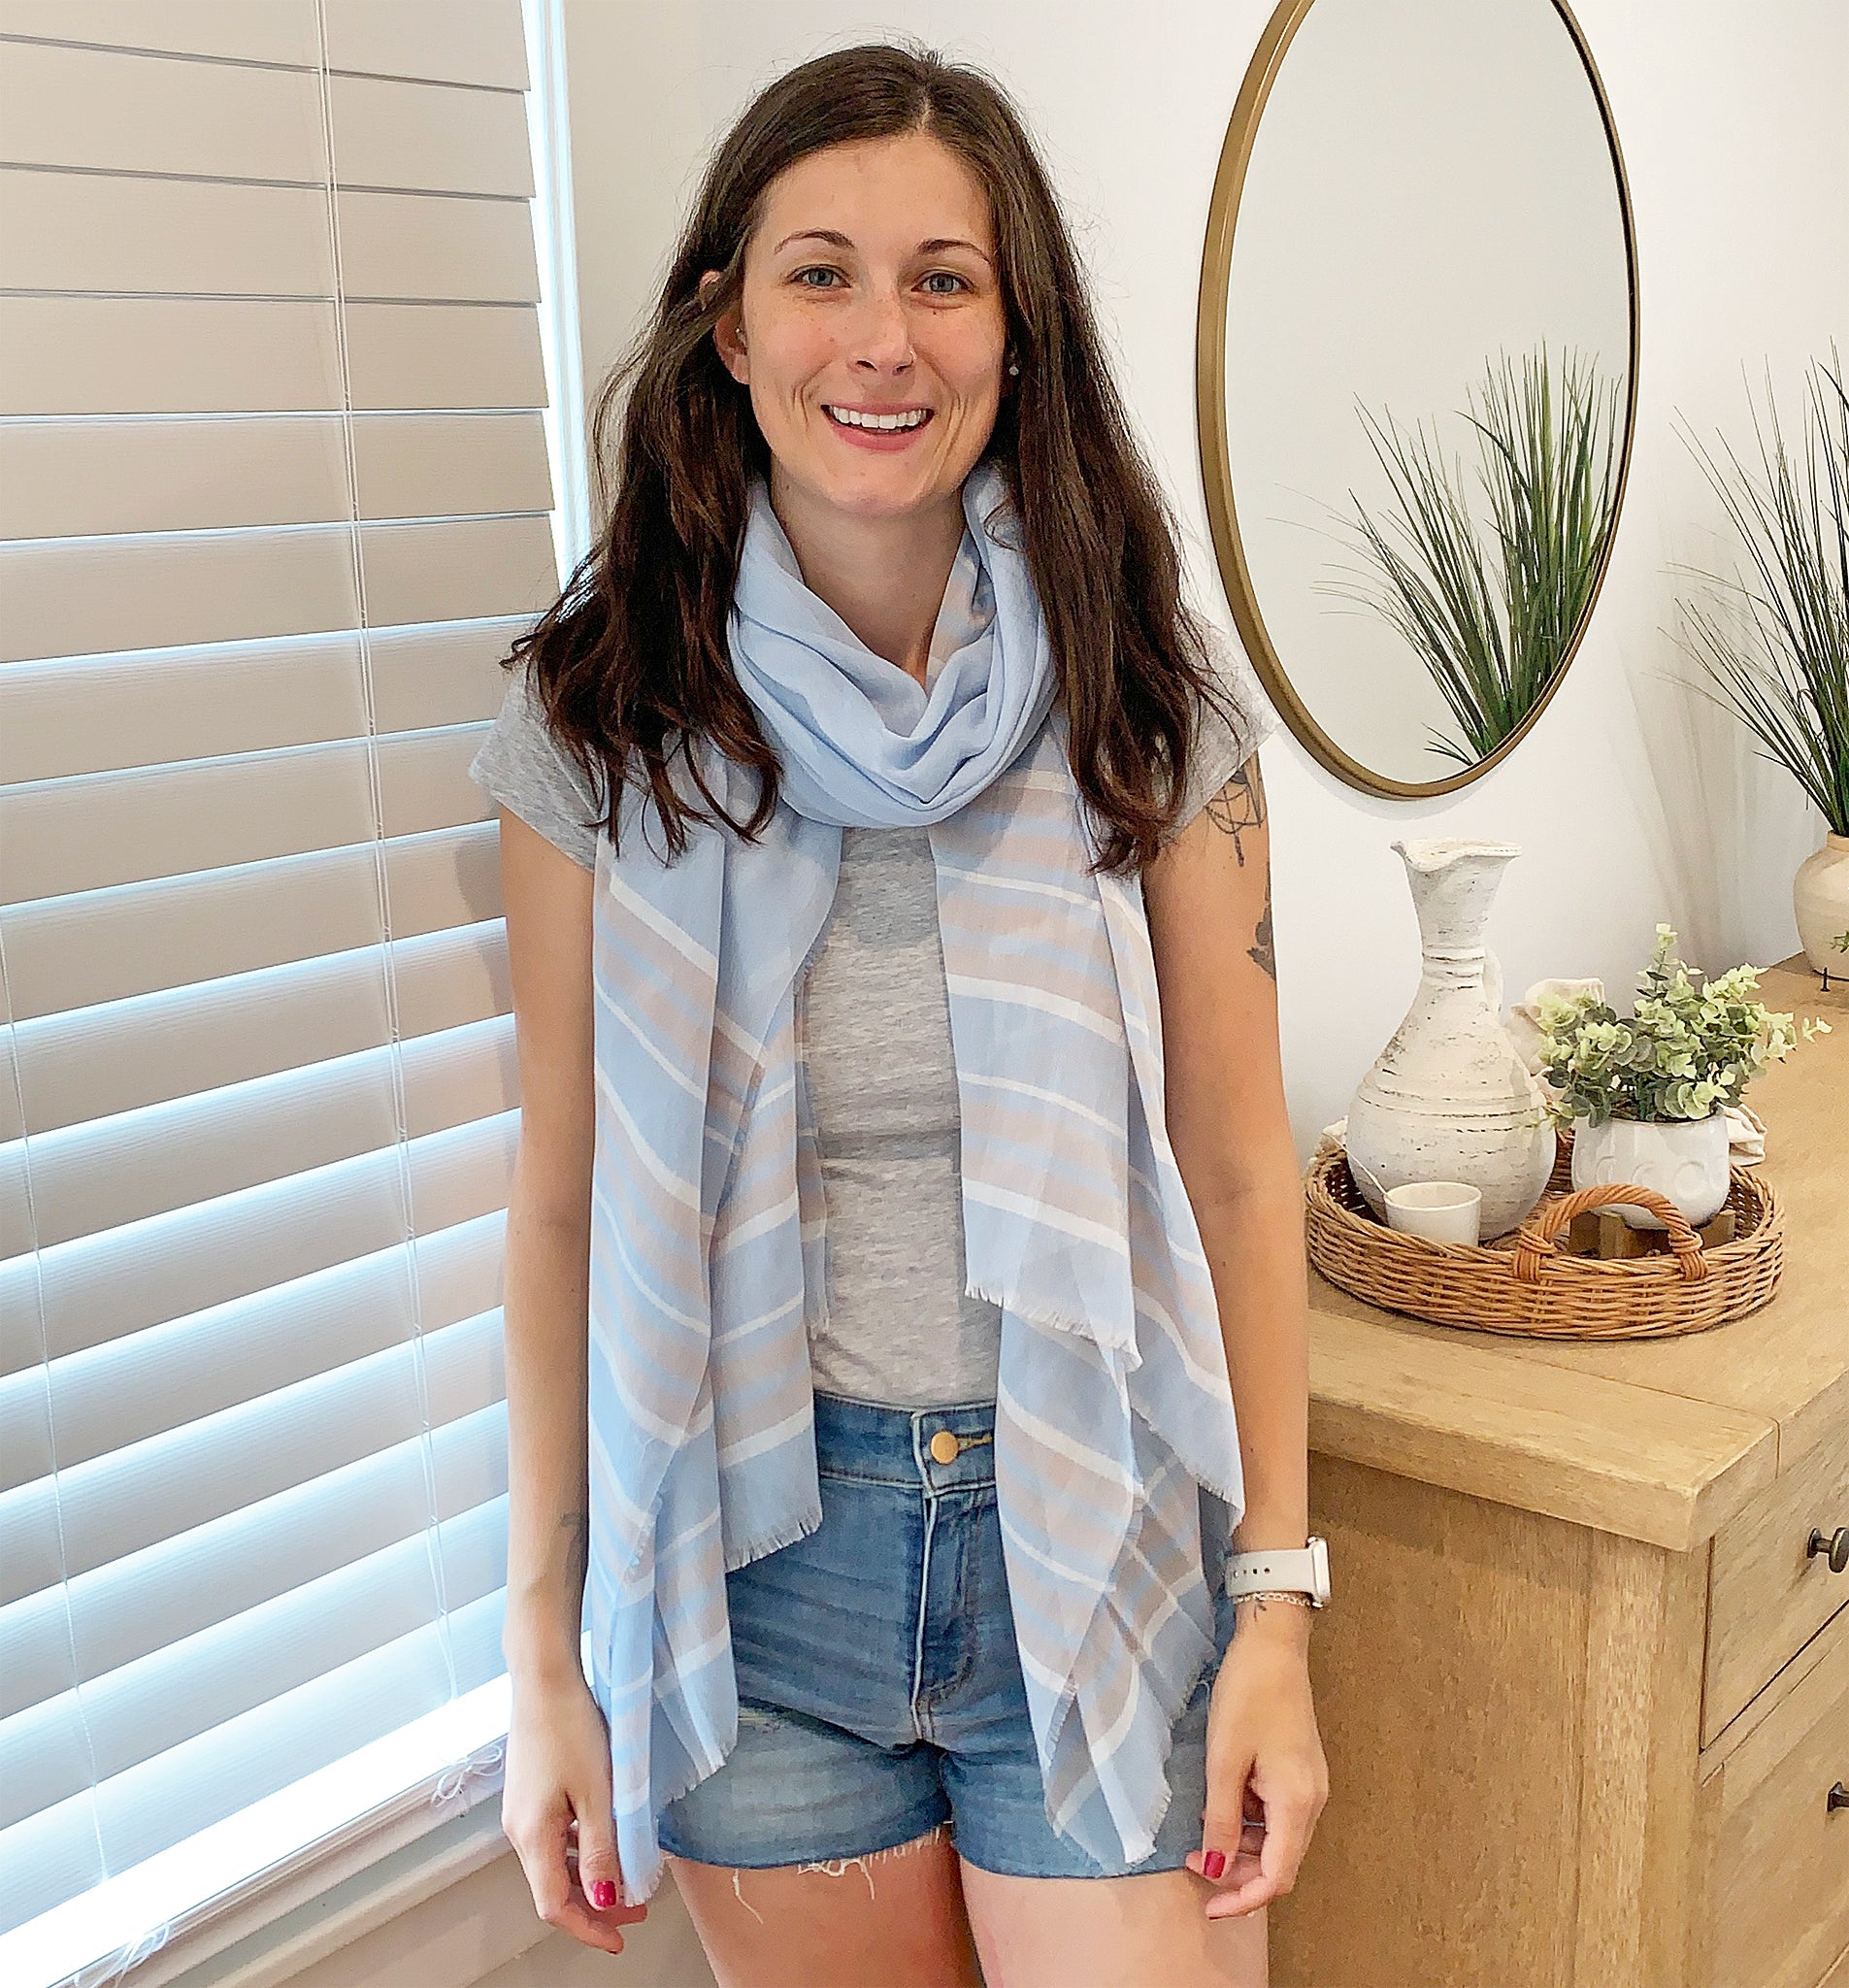 Blue Pacific Turkish Cotton Stripe Scarf in Powder Blue and Sand